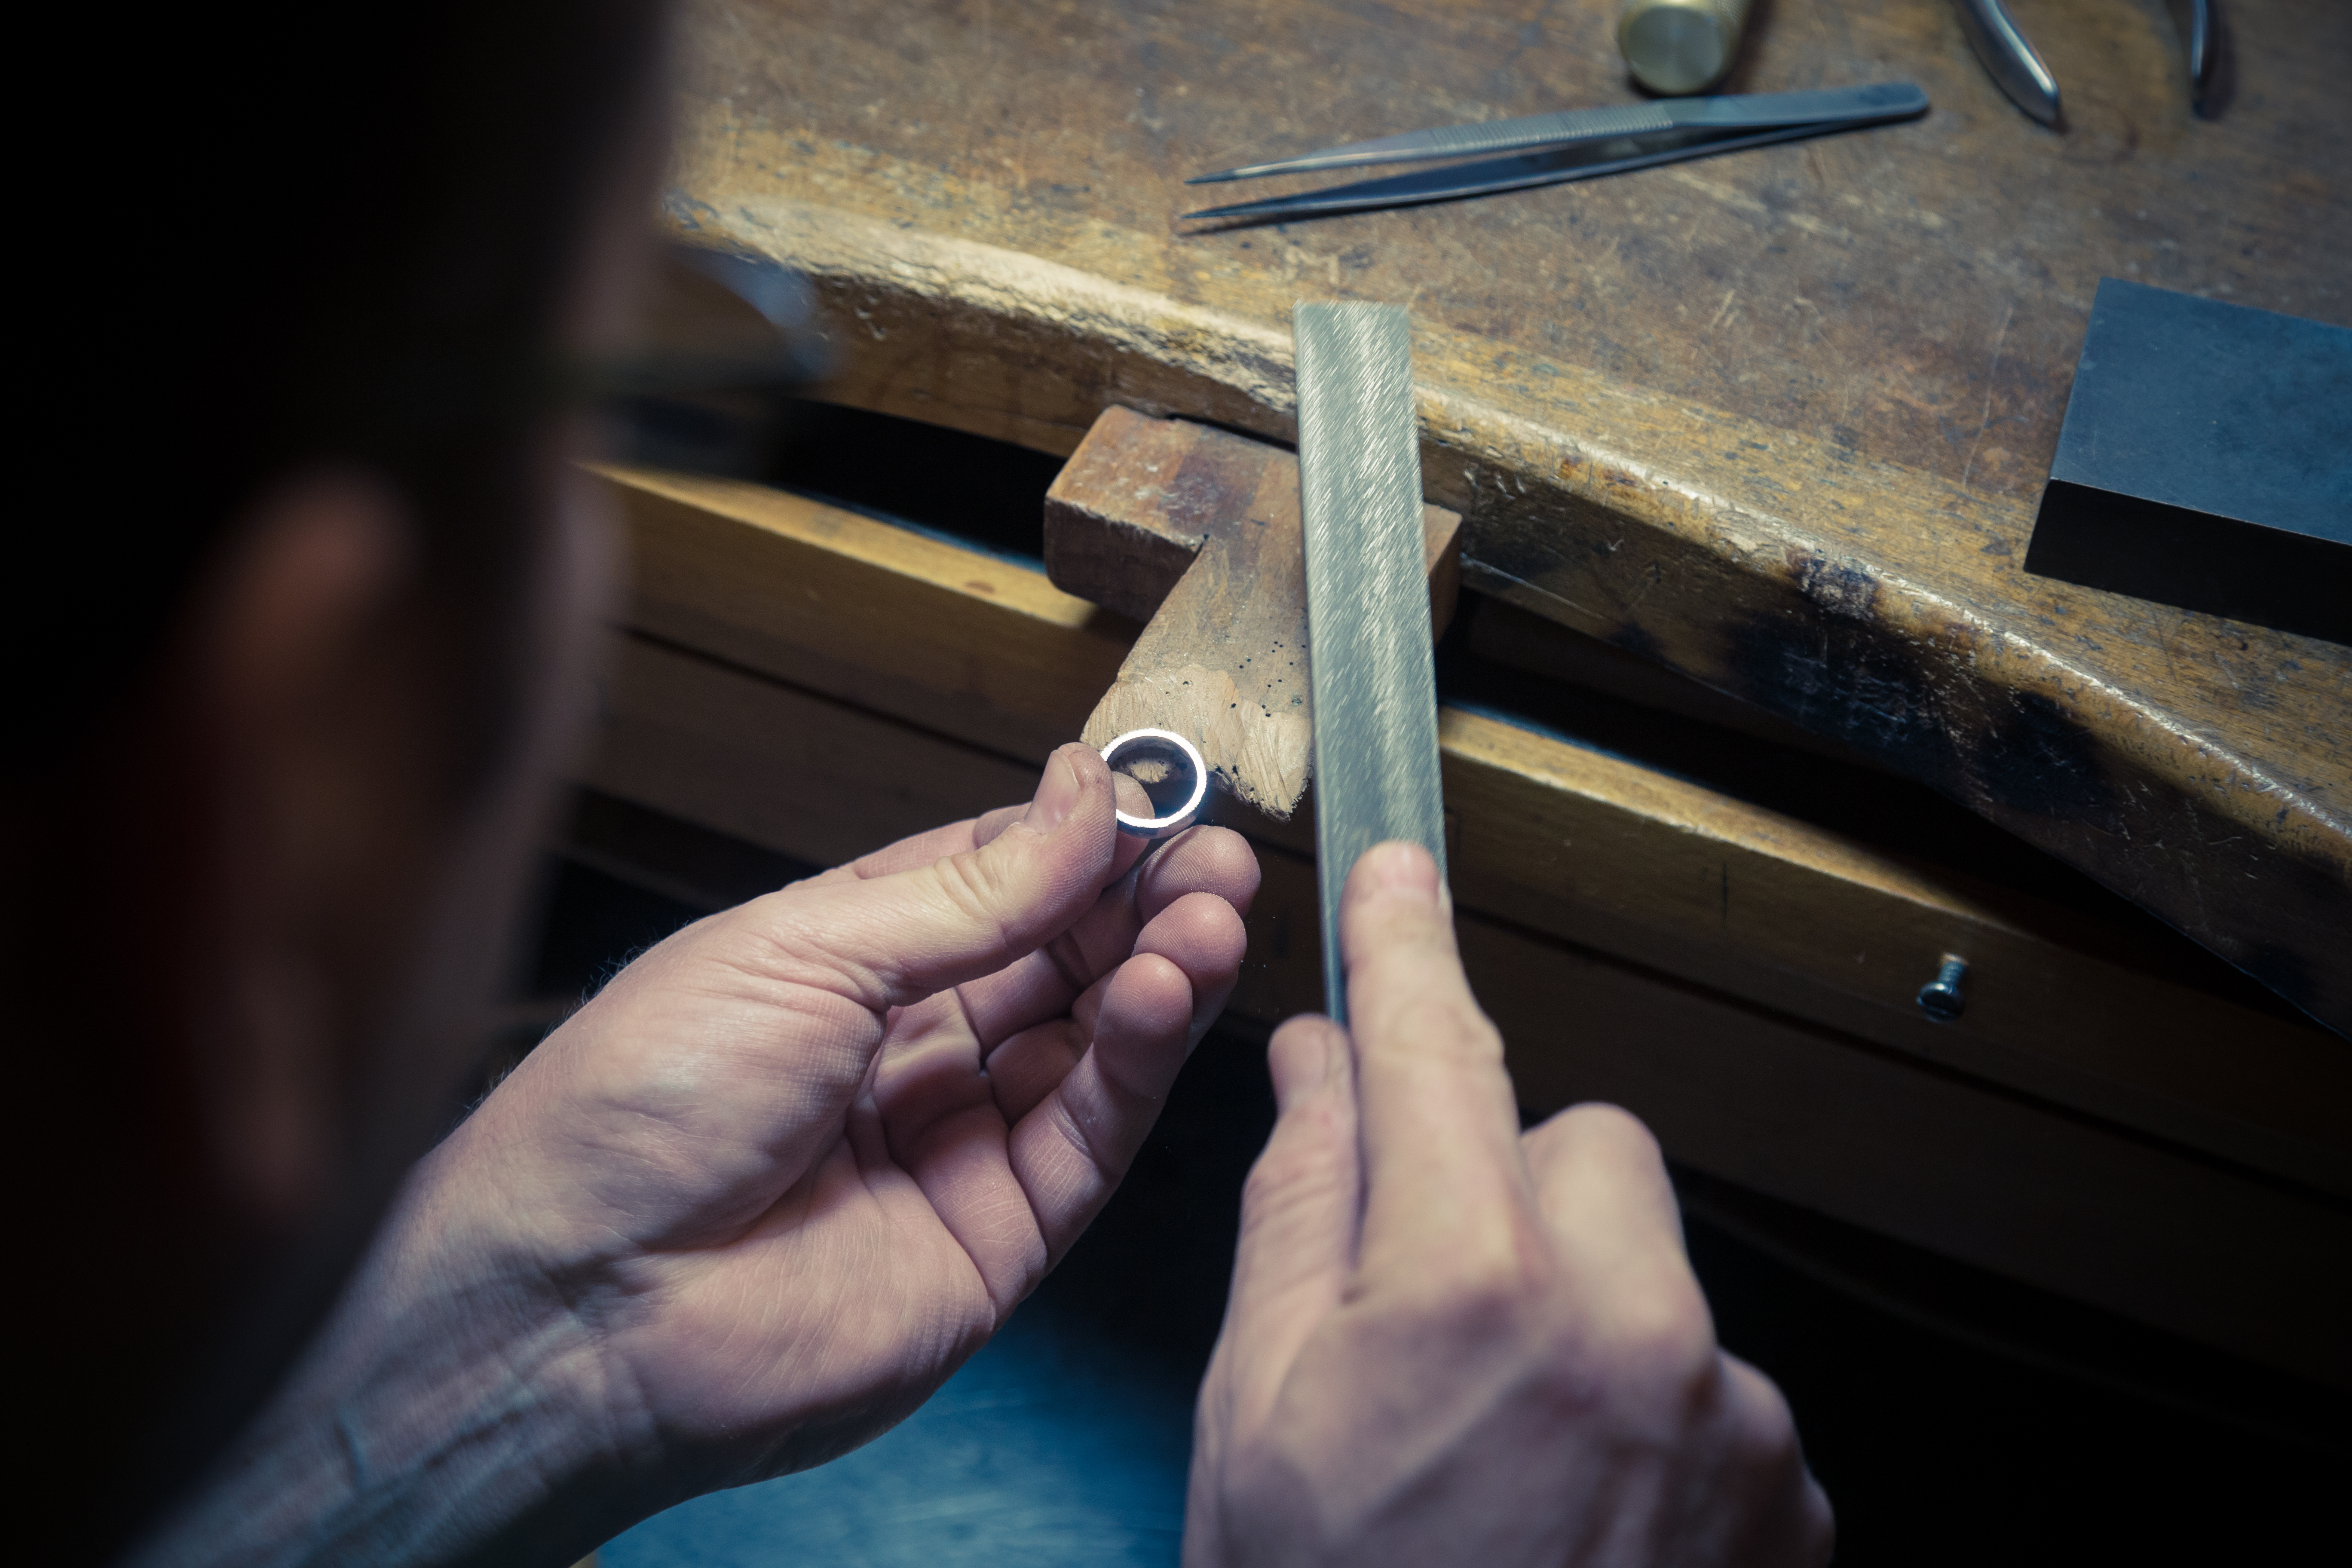 Photograph looking over woman's shoulder. She is sitting at a timber jeweller's bench, filing a silver ring with a hand-held metal file.